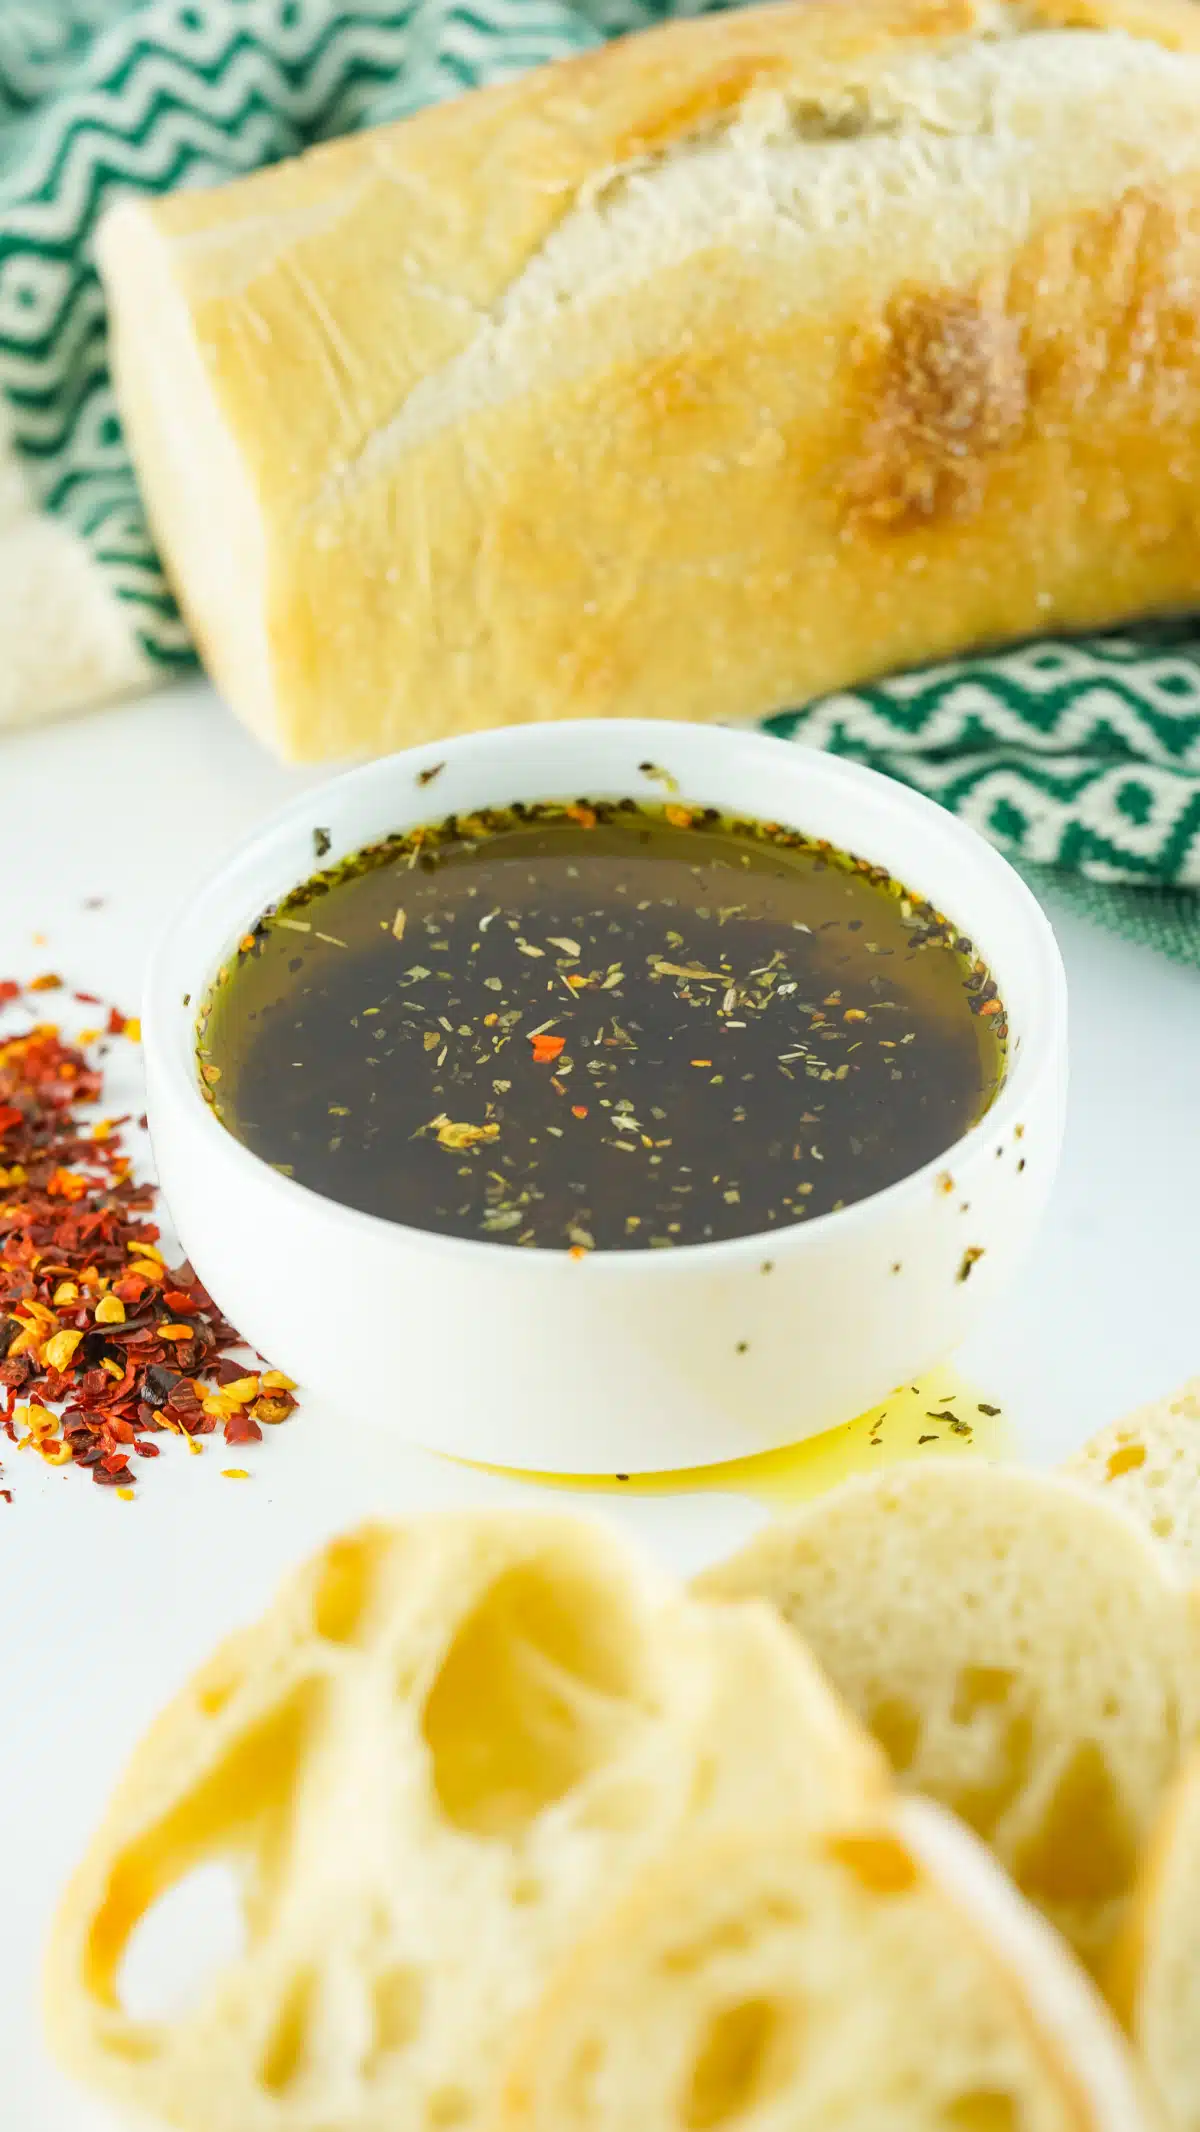 bowl of olive oil dipping sauce with loaf of bread